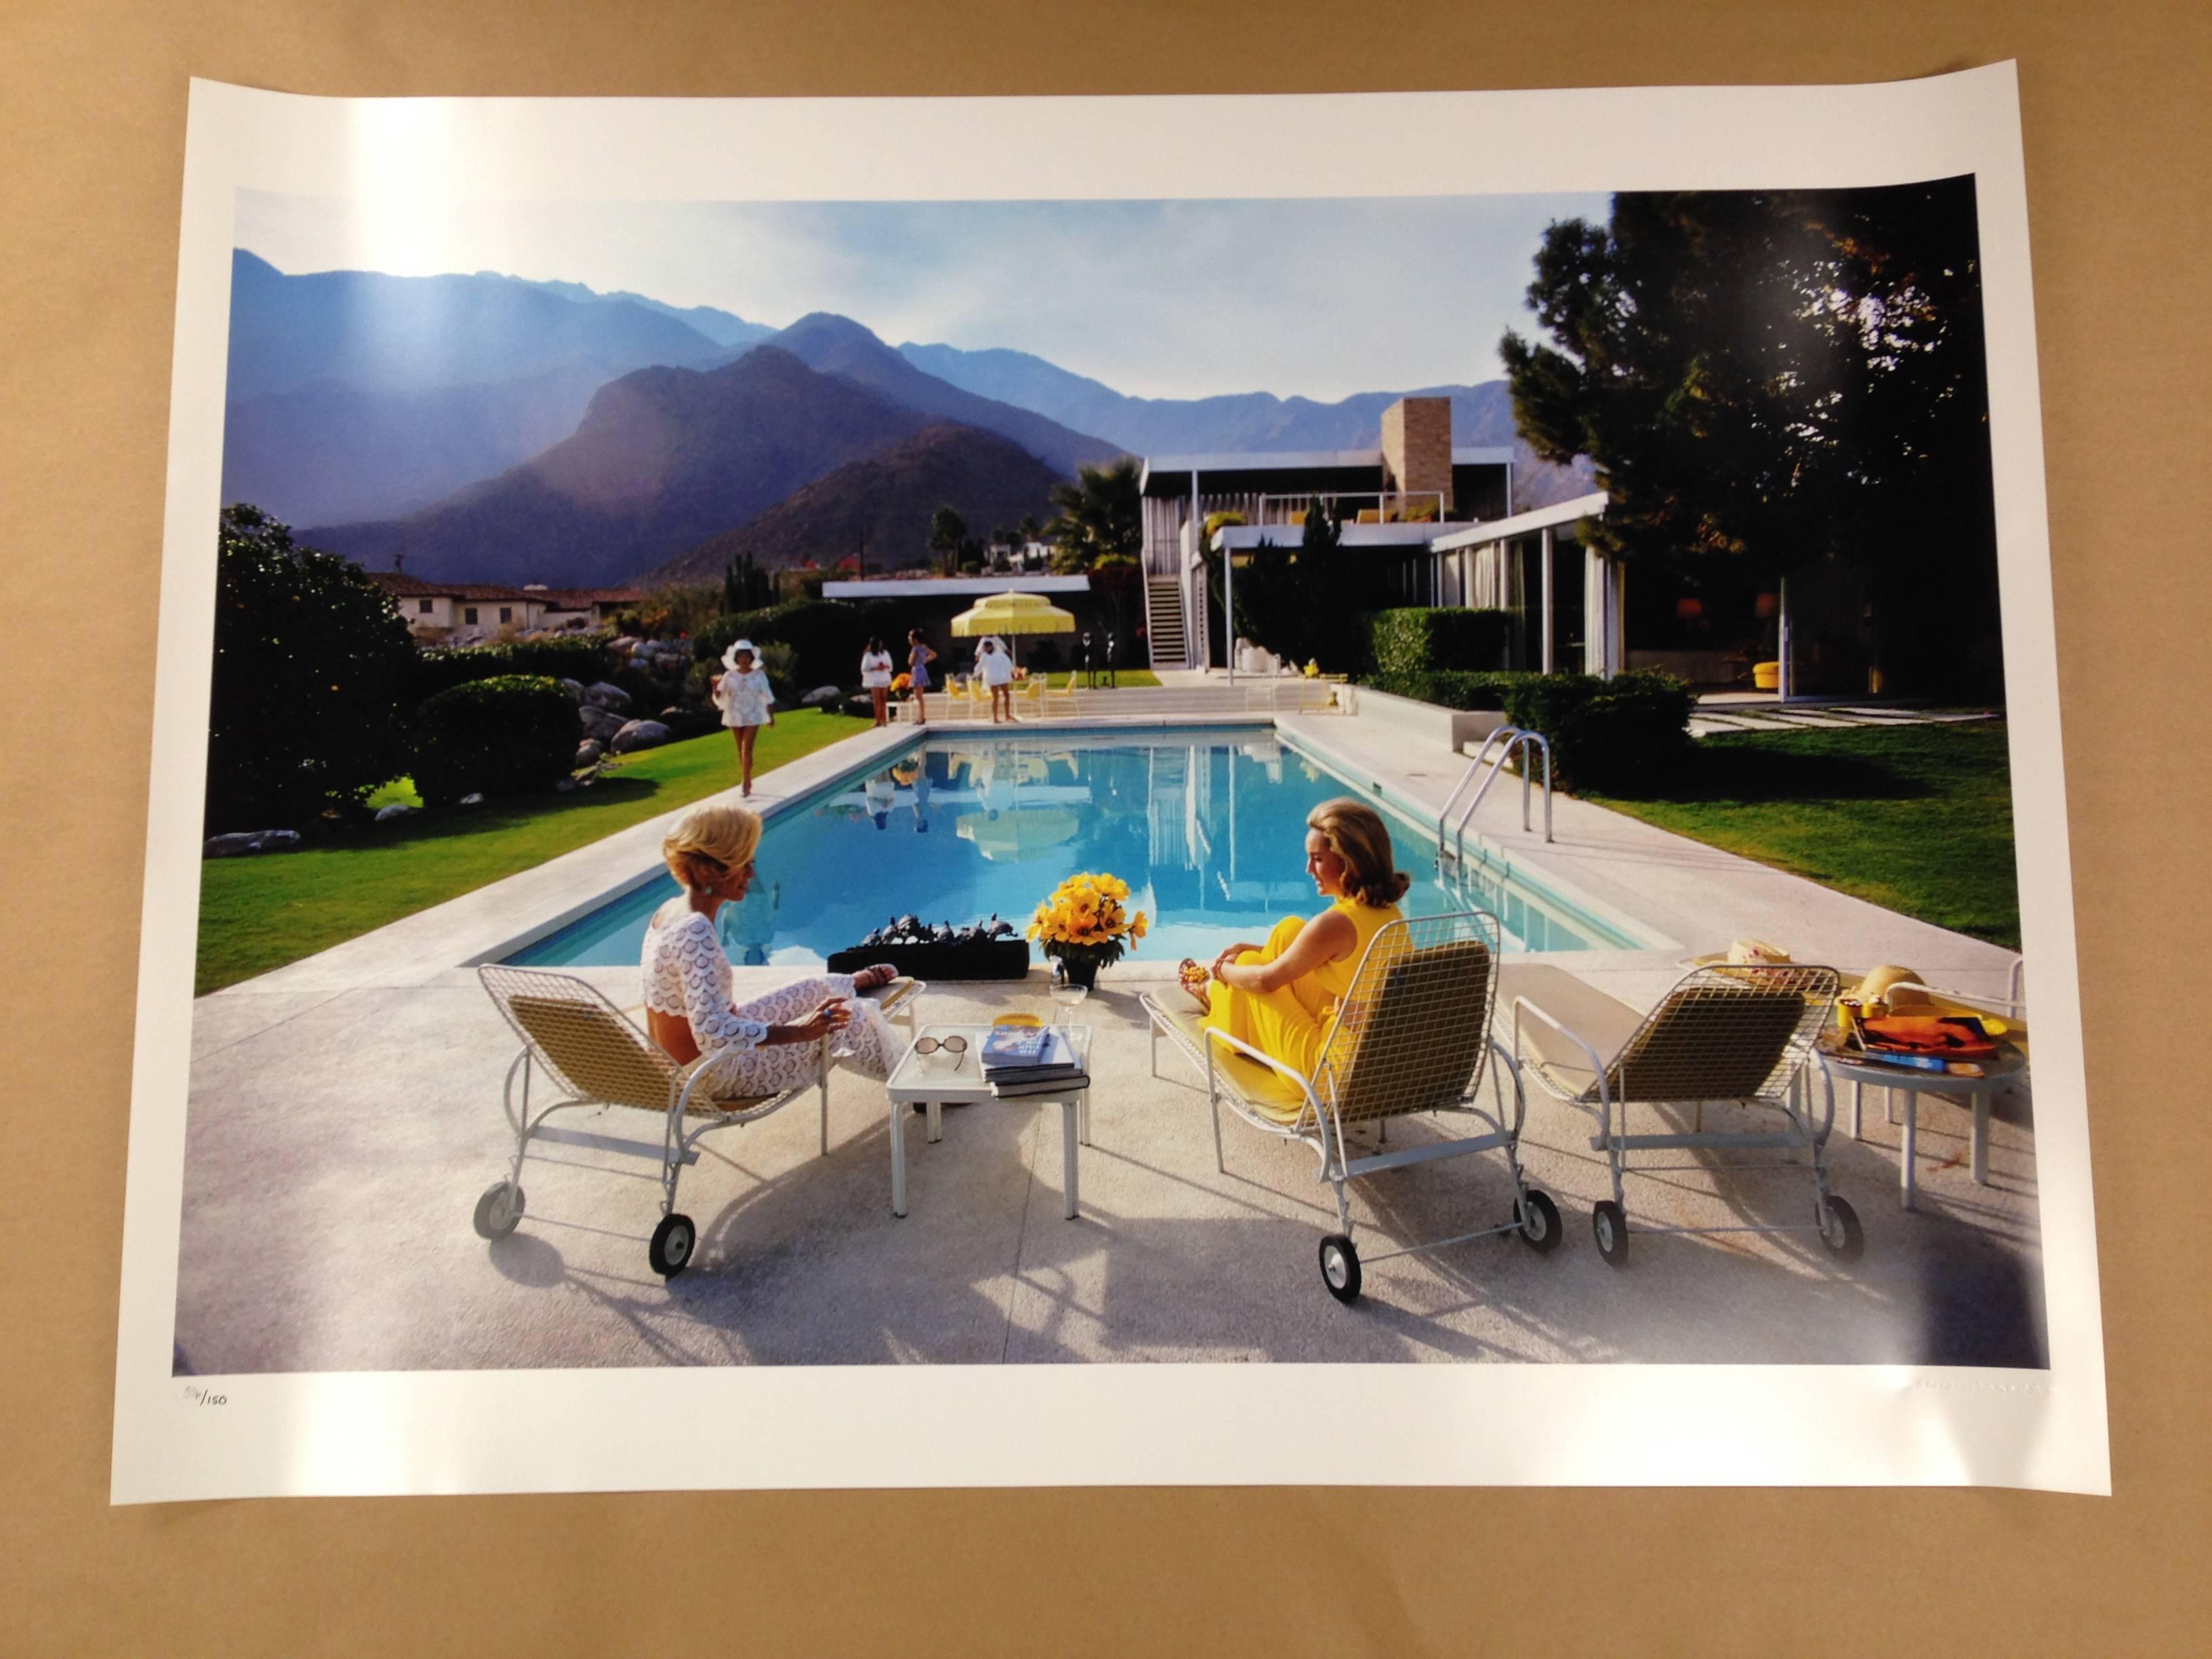 Poolside Glamour - Photograph by Slim Aarons